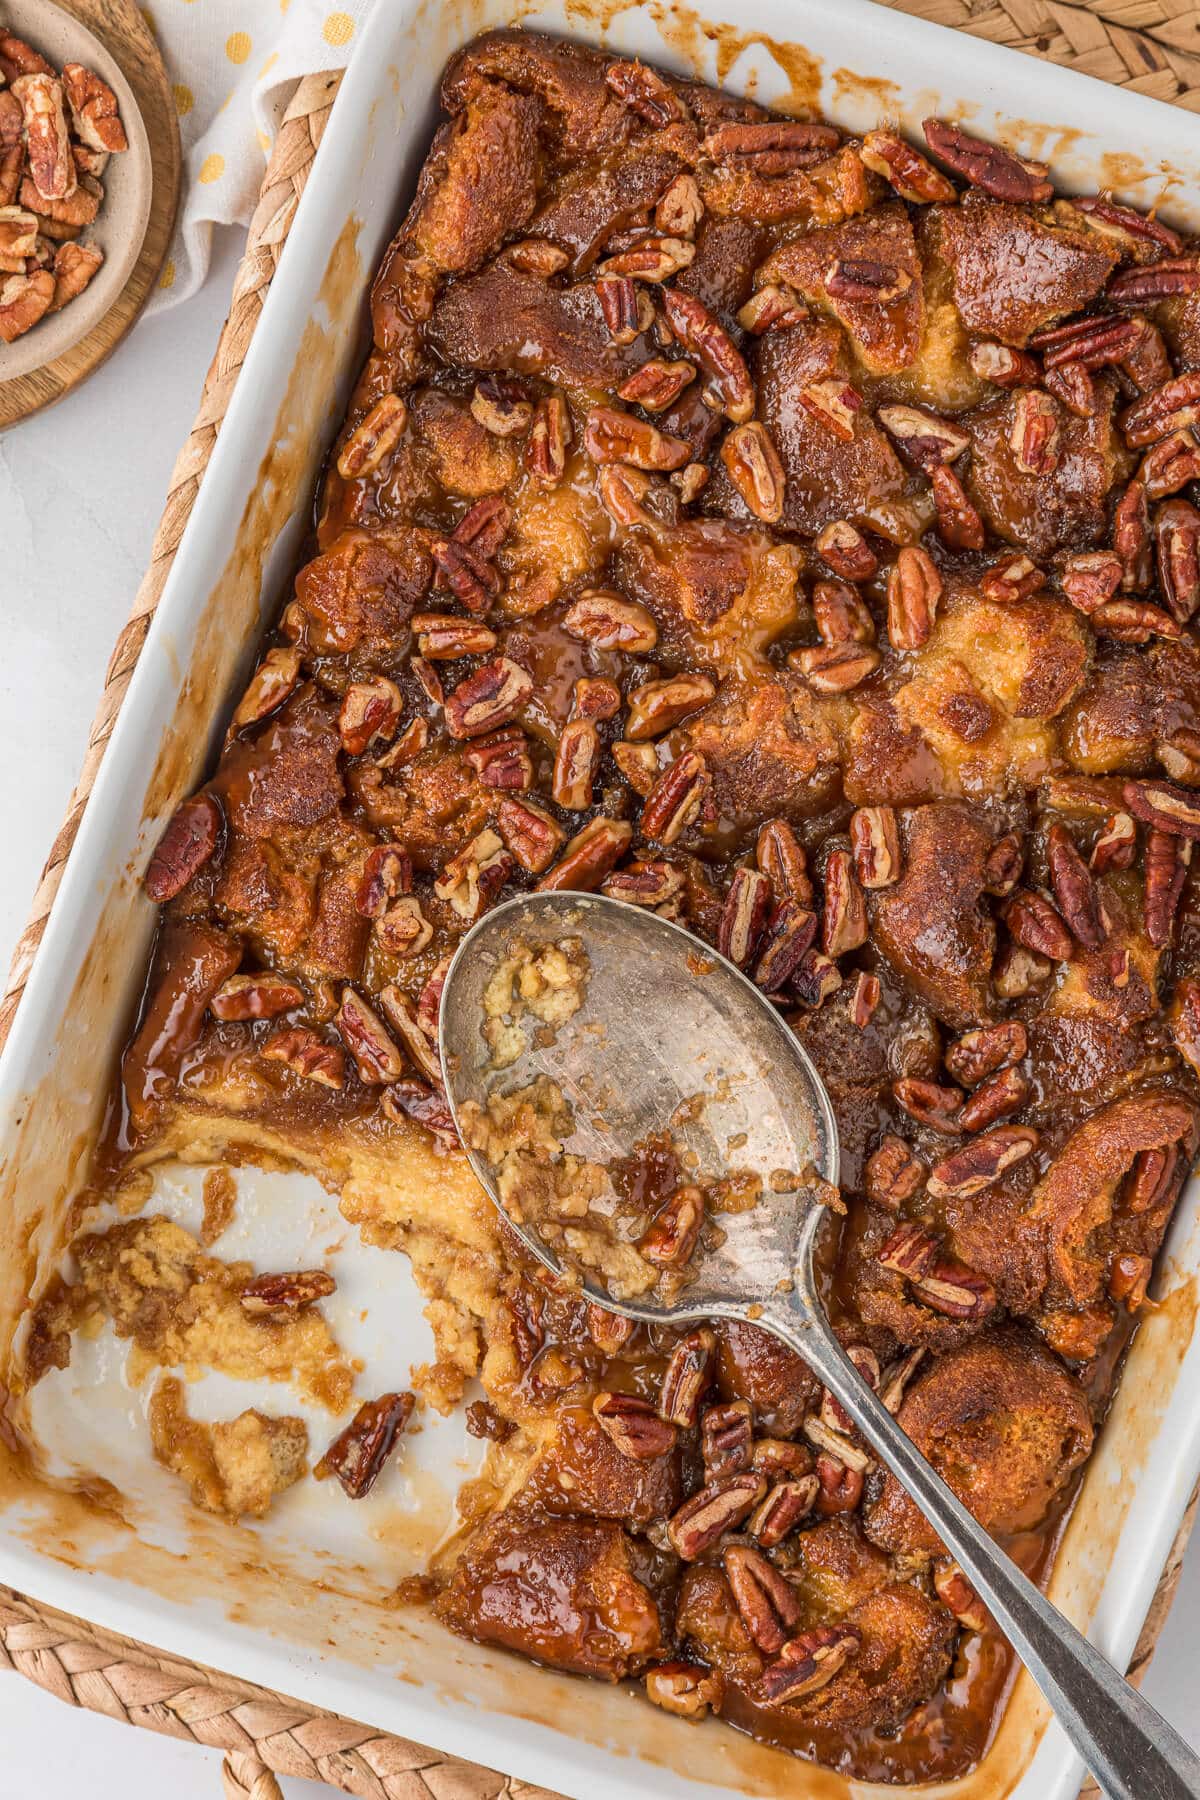 Caramel pecan breakfast casserole in a white pan with a serving spoon.